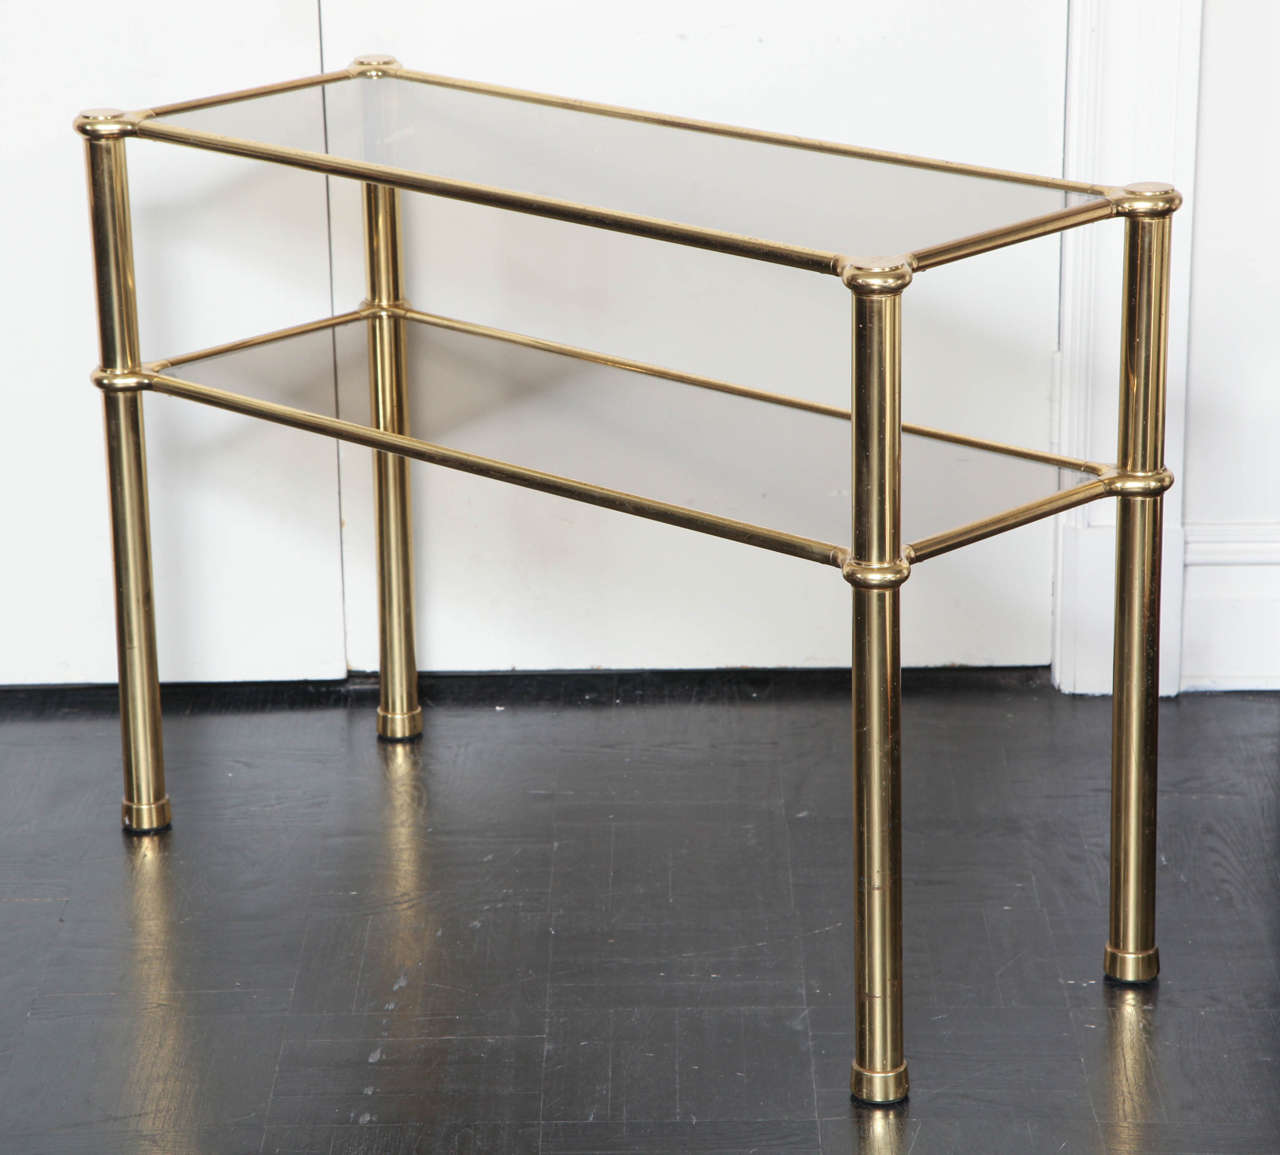 Mid-20th century polished gilt brass and smoked glass two-tier console table.